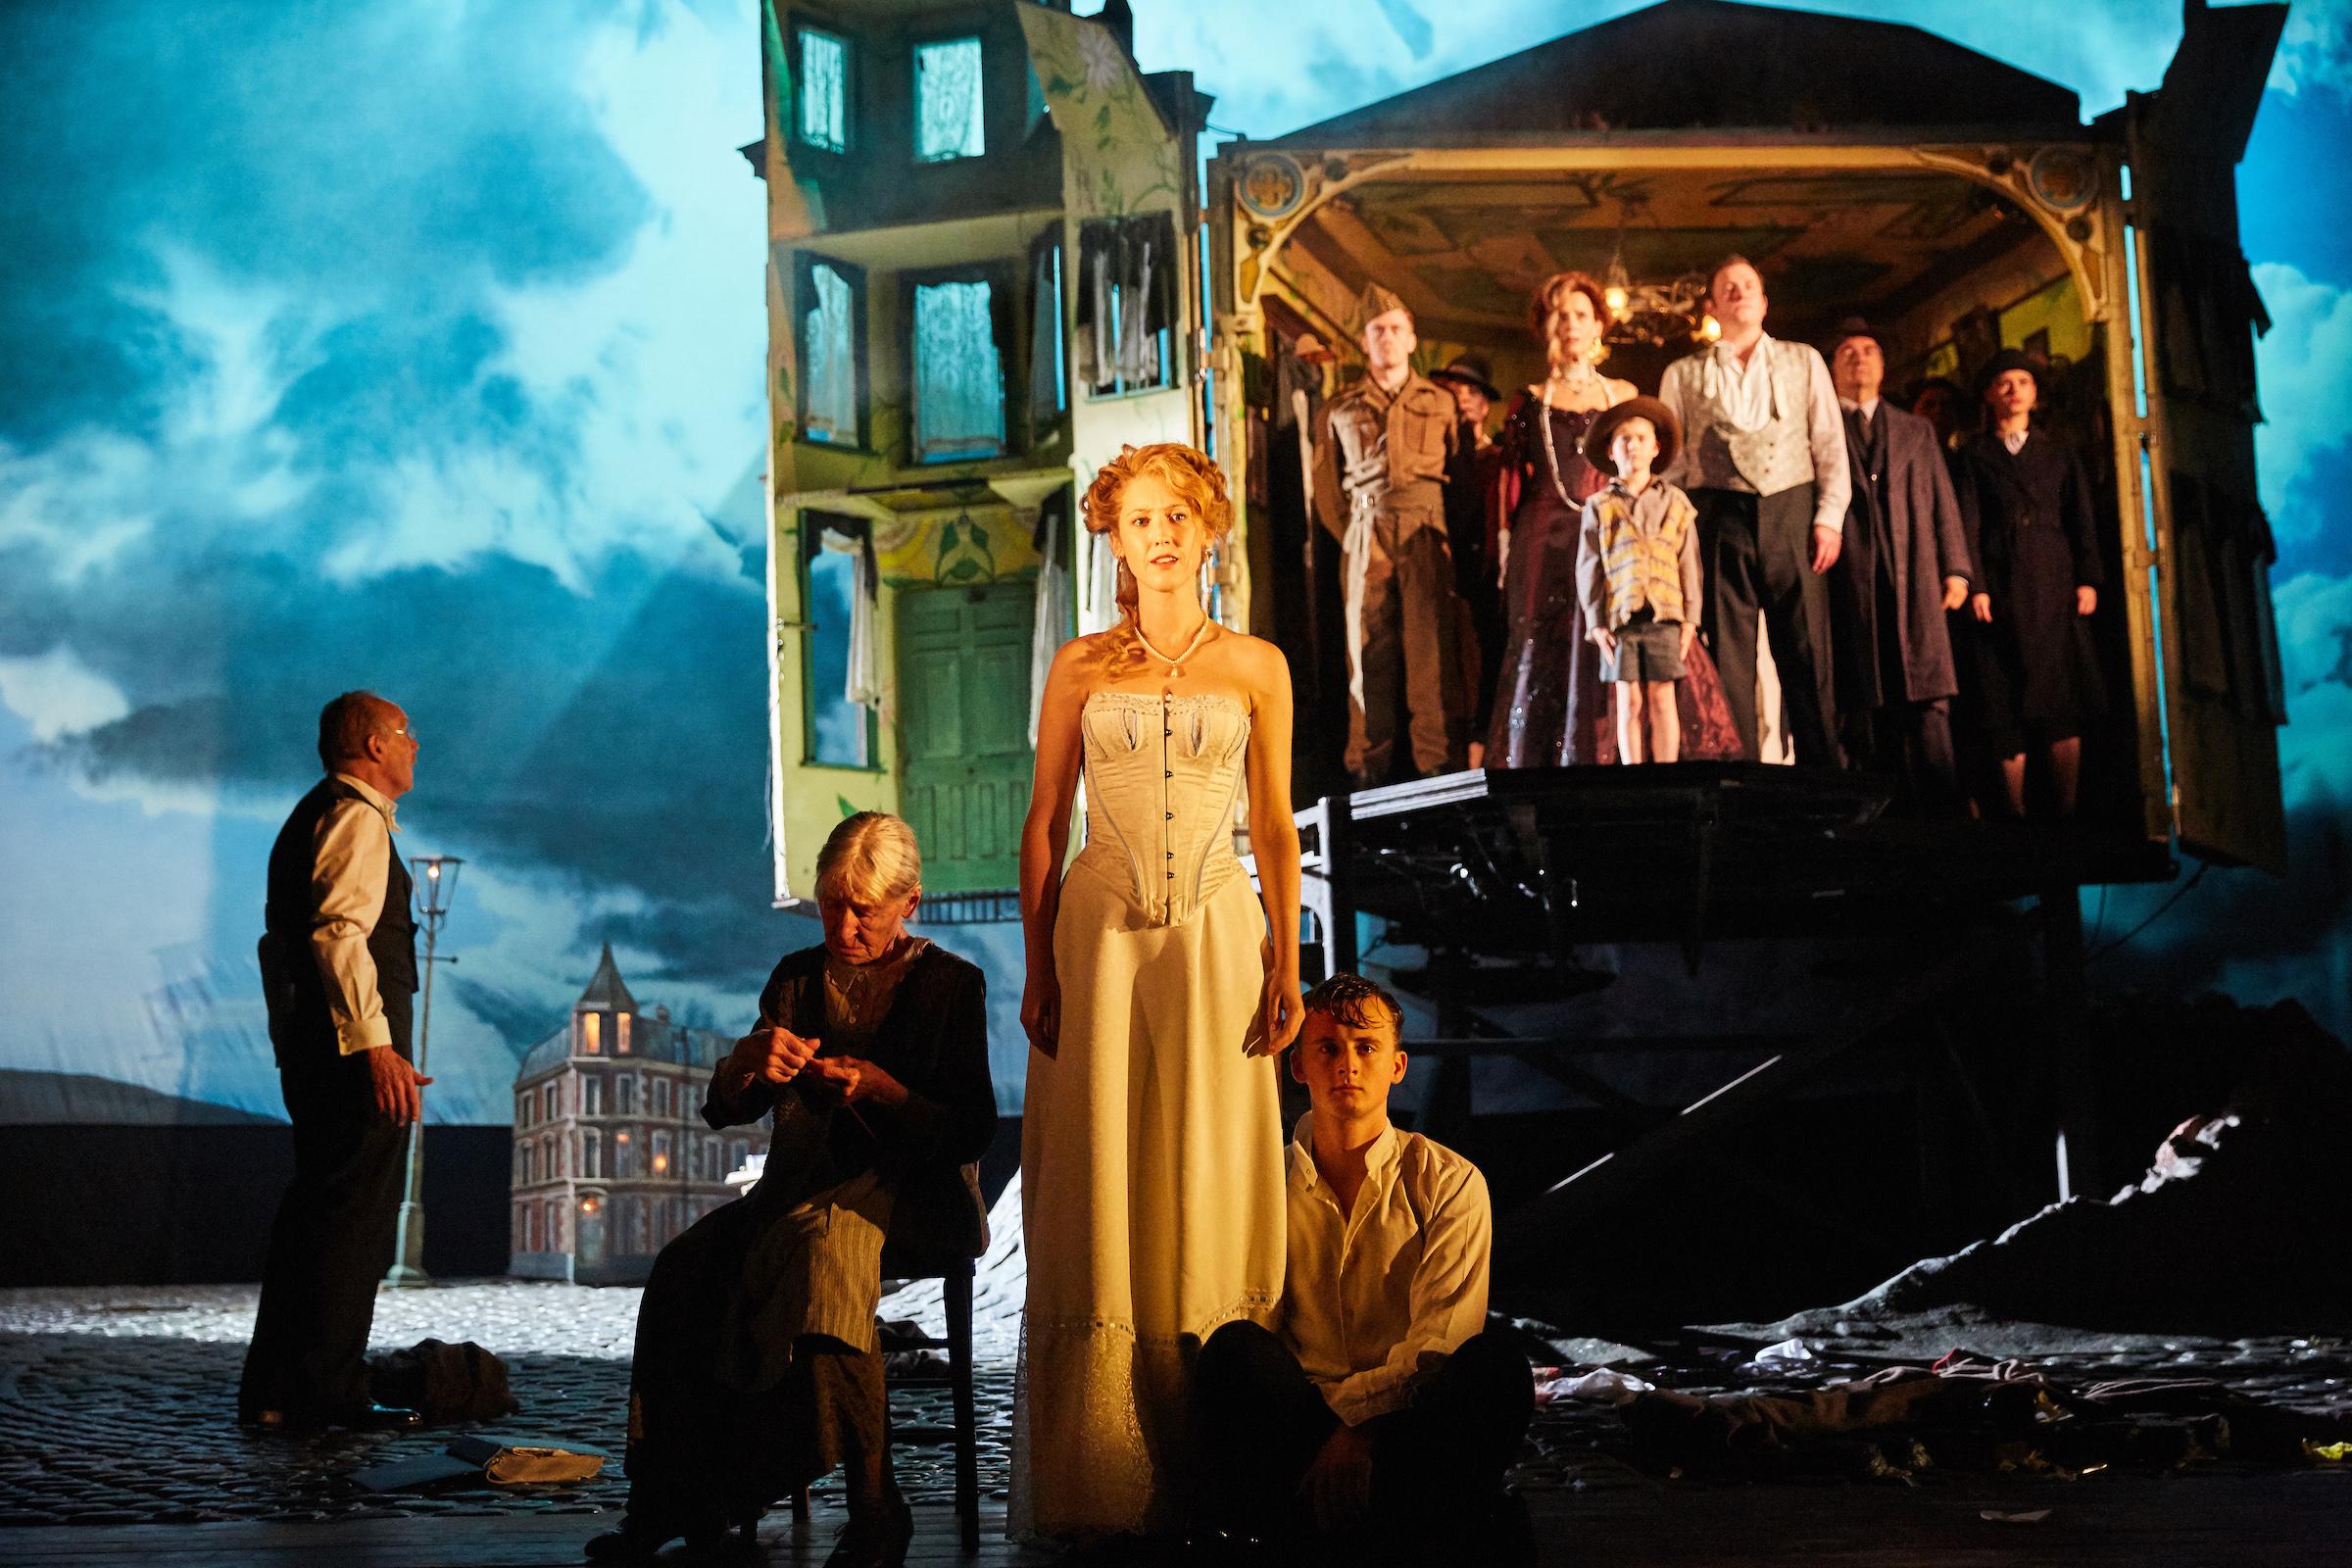 The National Theatre of Great Britain’s award-winning production of J.B. Priestley’s thriller “An Inspector Calls.” (Photo by Mark Douet)